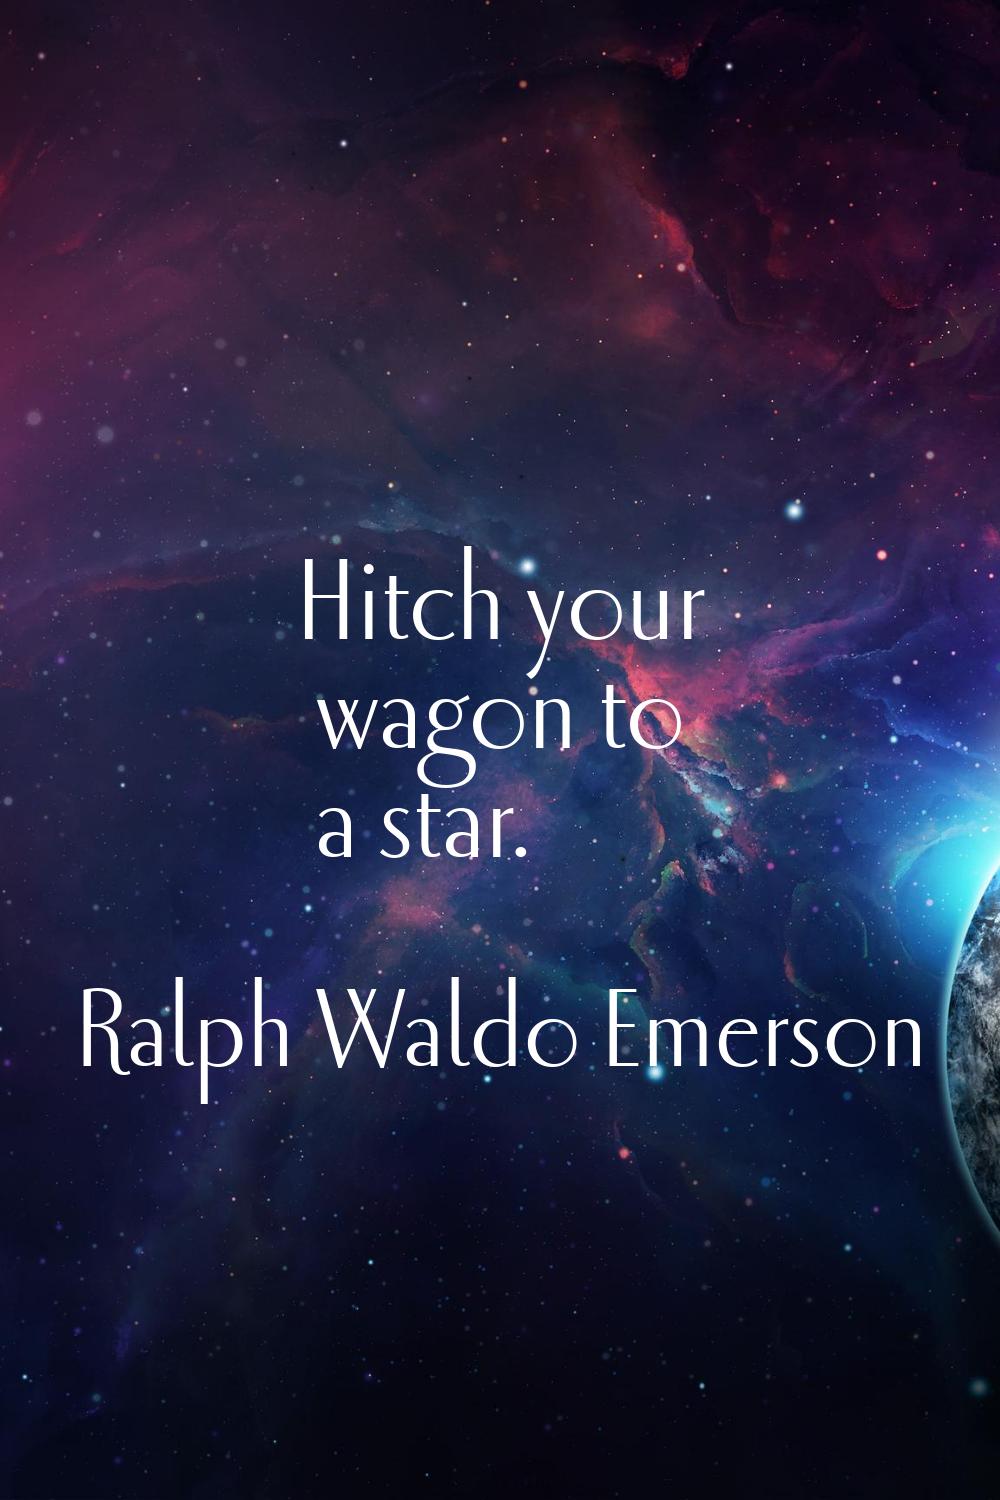 Hitch your wagon to a star.